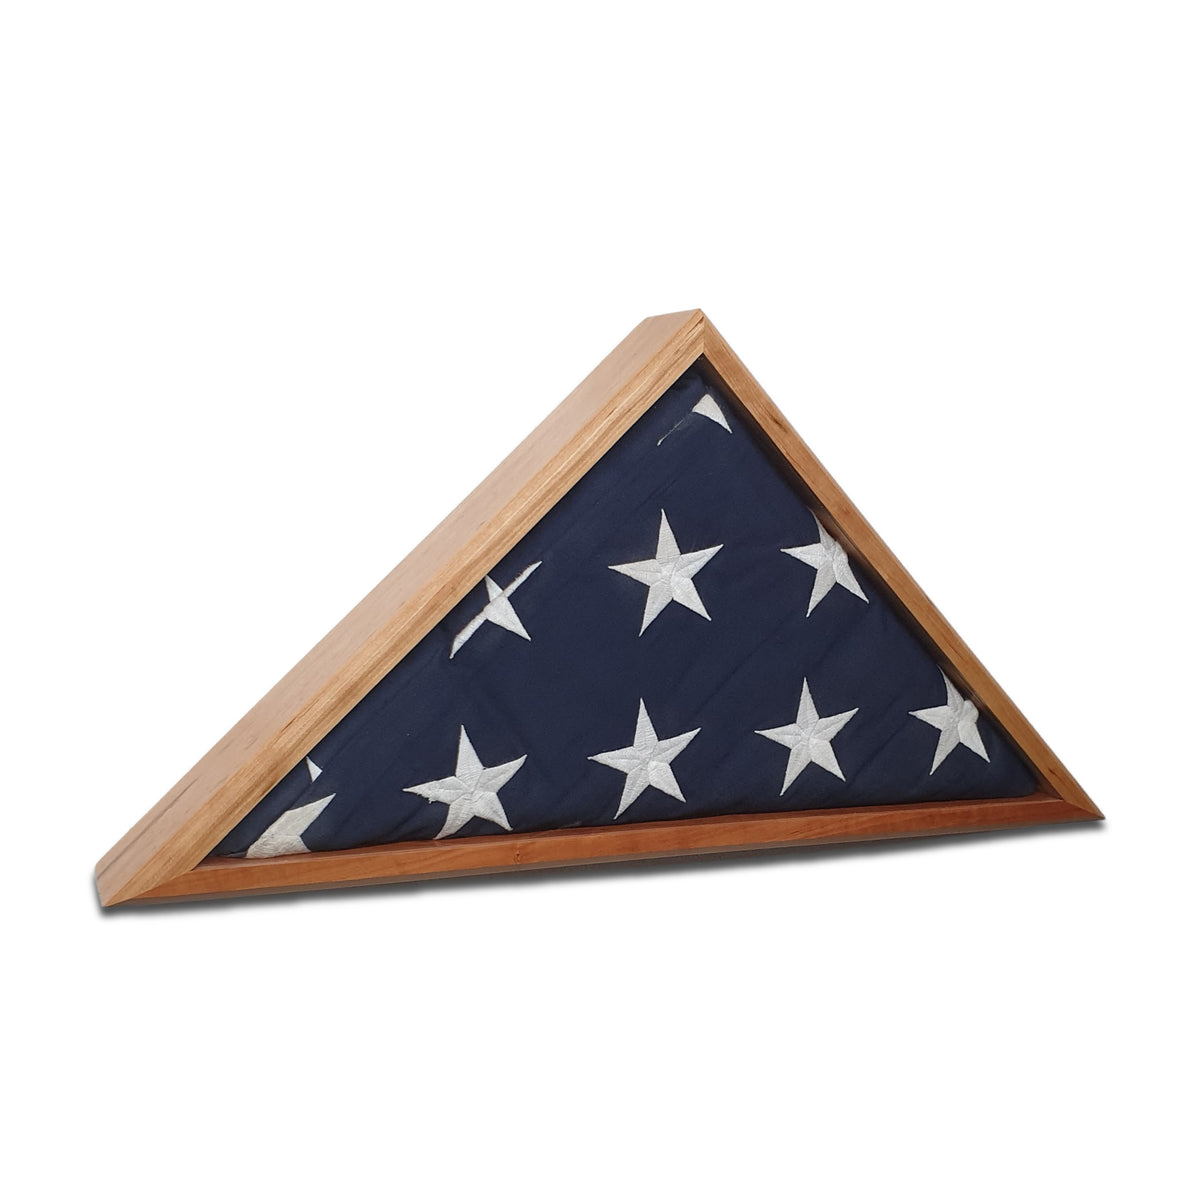 Burial Memorial Flag Display Case for deceased Veteran. Holds one folded 5' by 9.5' burial flag. Made with real Cherry hardwood. American Made - Veteran Built